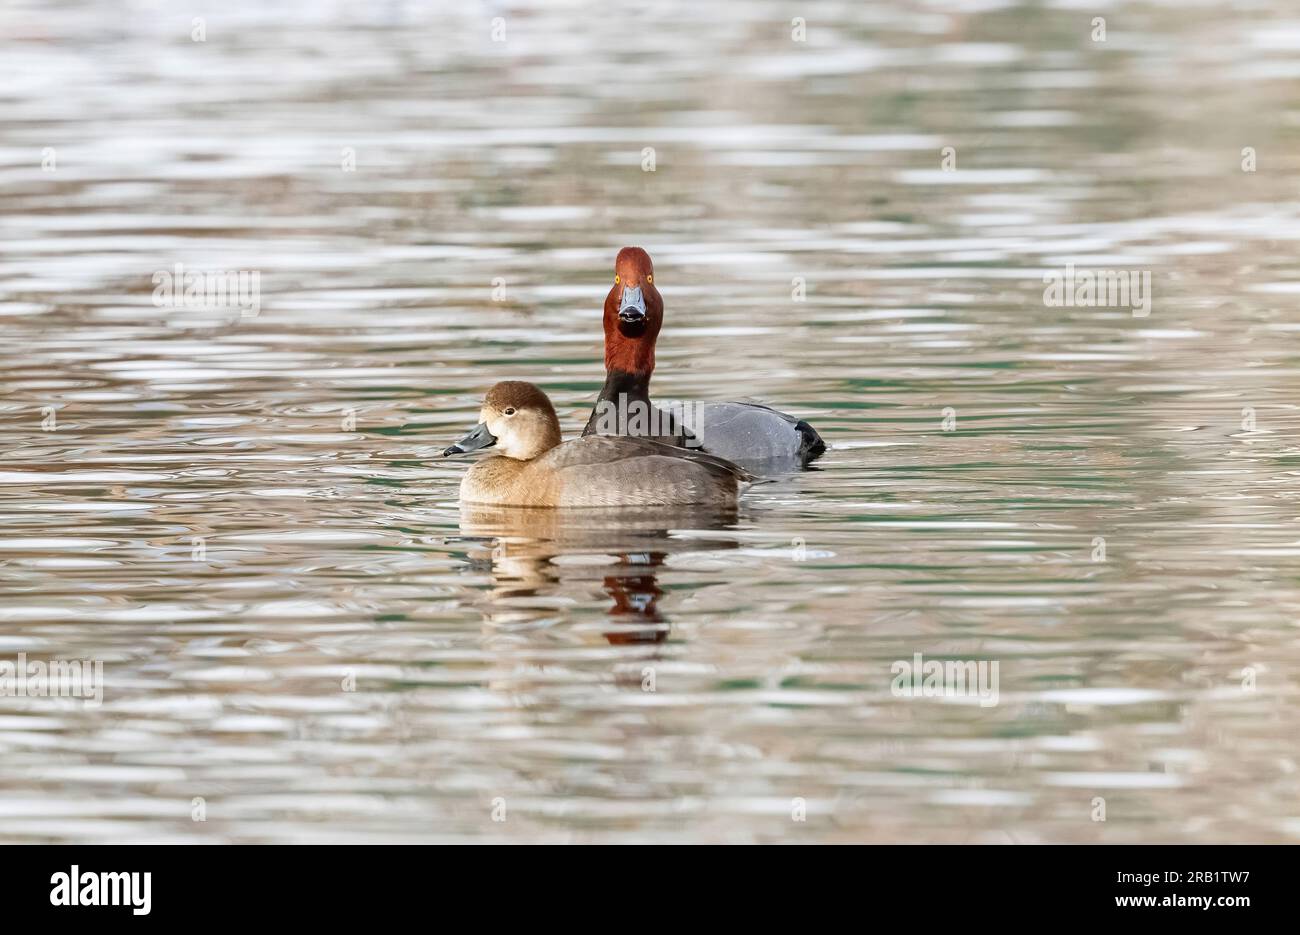 A Redhead duck with a long outstretched neck performing a courtship ritual behind a female. Stock Photo